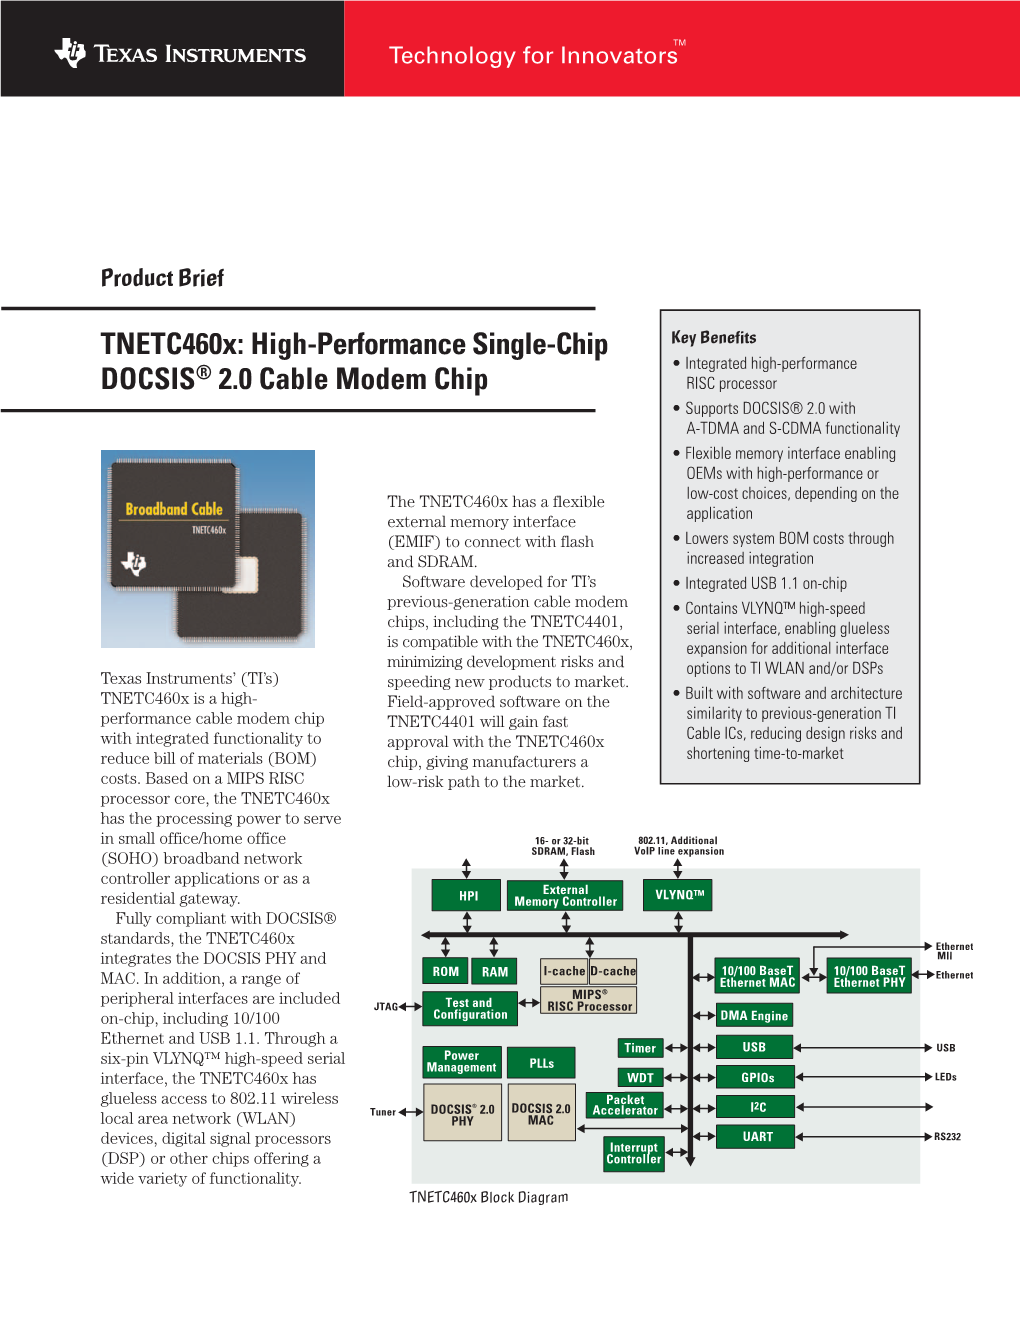 High-Performance Single-Chip DOCSIS 2.0 Cable Modem Chip